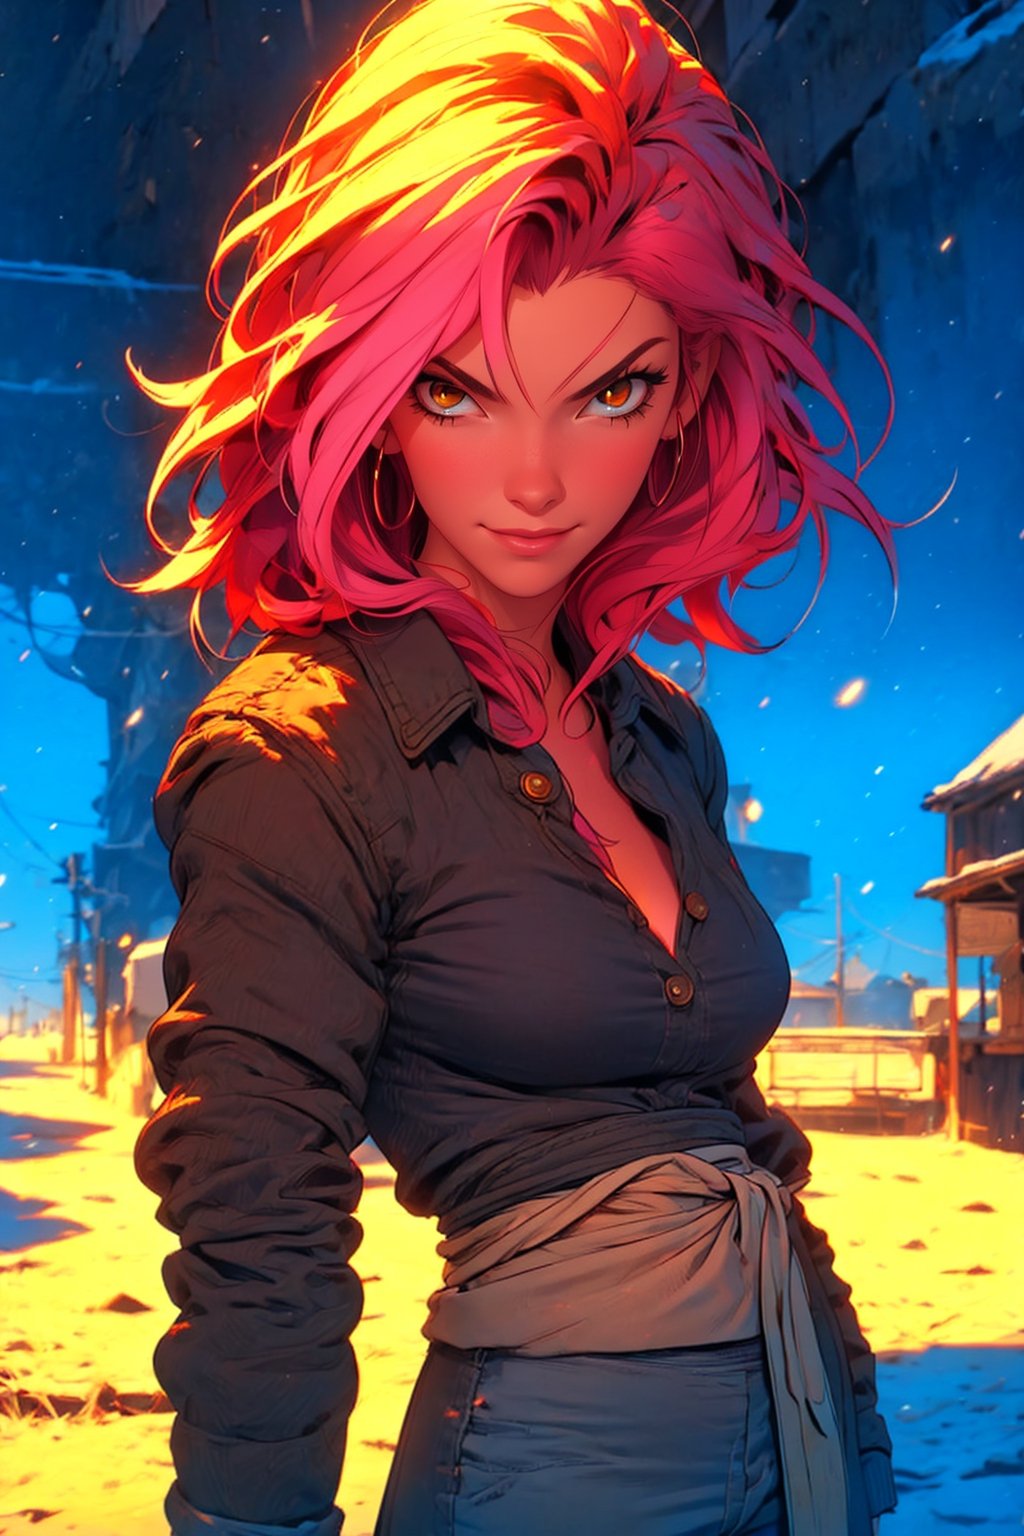 (Dave Wilkins style:1.4) ,(windy background), (best detailed), (best lighting), ( ultra-detailed), (best quality), 1 girl, yellow eyes, (detail eyes), pale_skin, pink_hair, ((straight_hair)), bangs, short-hair, past-the-waist, large breasts, (black long sleeve),sitting on the bed wearing nothing on just a long sleeve button shirt. Button down showing cleavage. (NSFW nudity, naked), slim thicc, perfect smooth skin, detailed skin,(Dave Wilkins style:1.4) ,Retro,background,ARTSTYLE_PabloRomero_ownwaifu,chibi,Anitoon2,cyber_mark,Eda Clawthorne,viking,guweiz style,arcane style, www.ownwaifu.com,long hair,The Owl House,anime